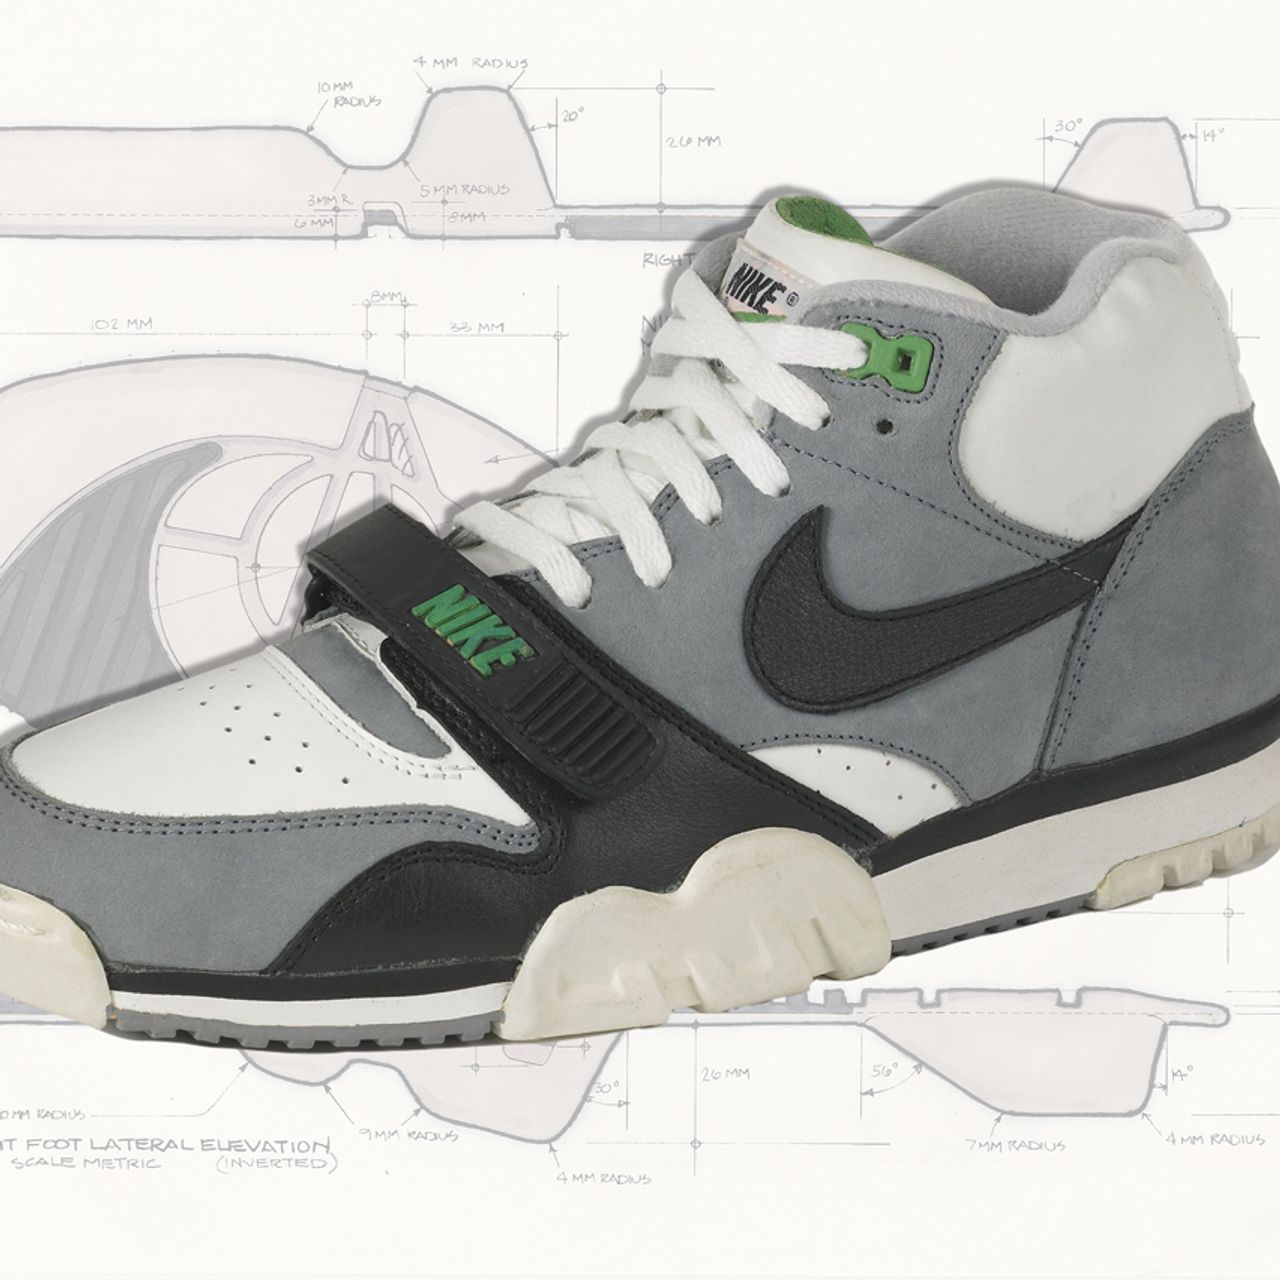 lápiz miel siguiente Five Facts You Need To Know About the Nike Air Trainer 1 - Sneaker Freaker